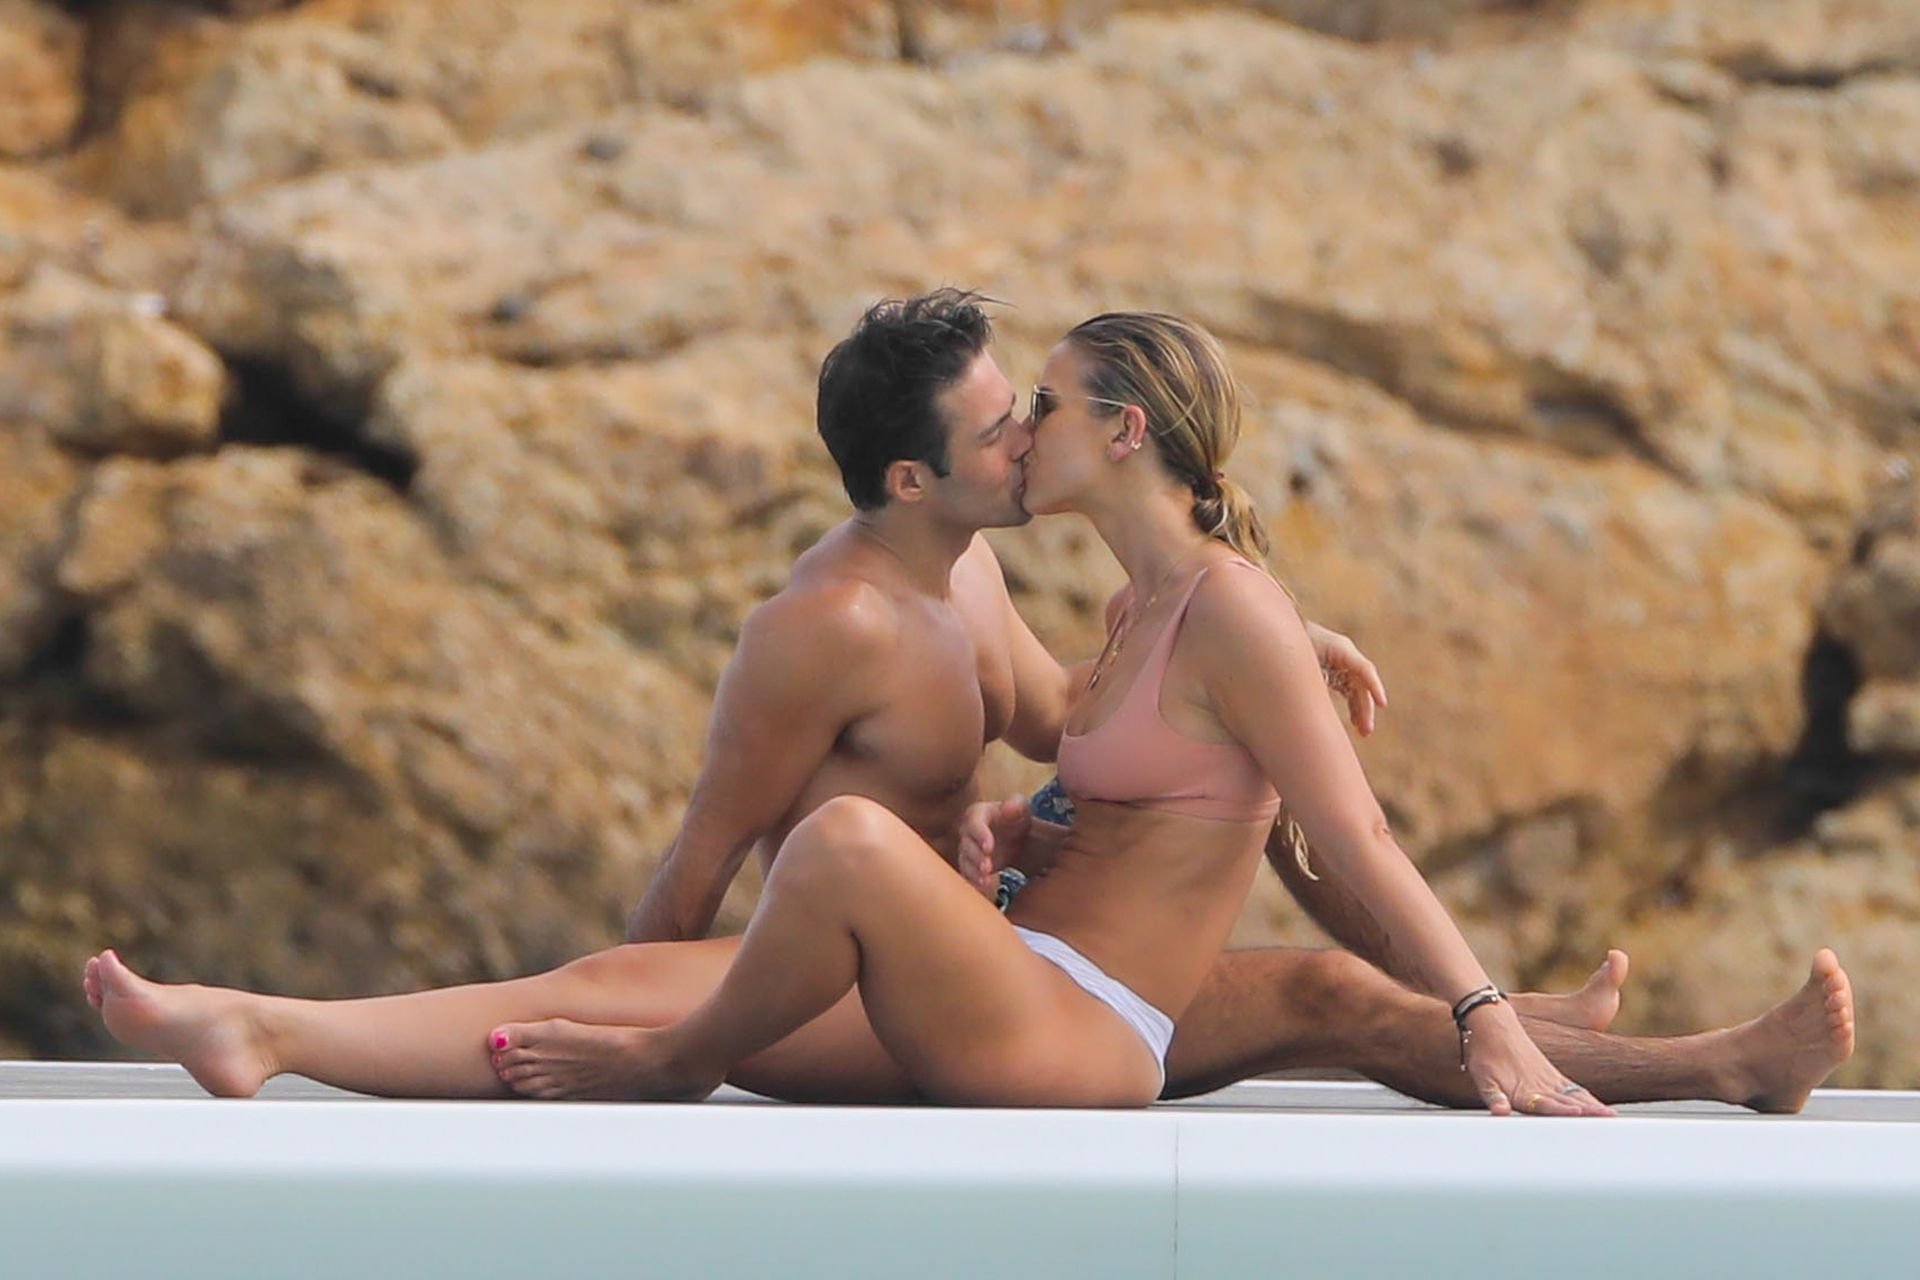 Vogue Williams (33) and Spencer Matthews were seen in love on vacation in S...